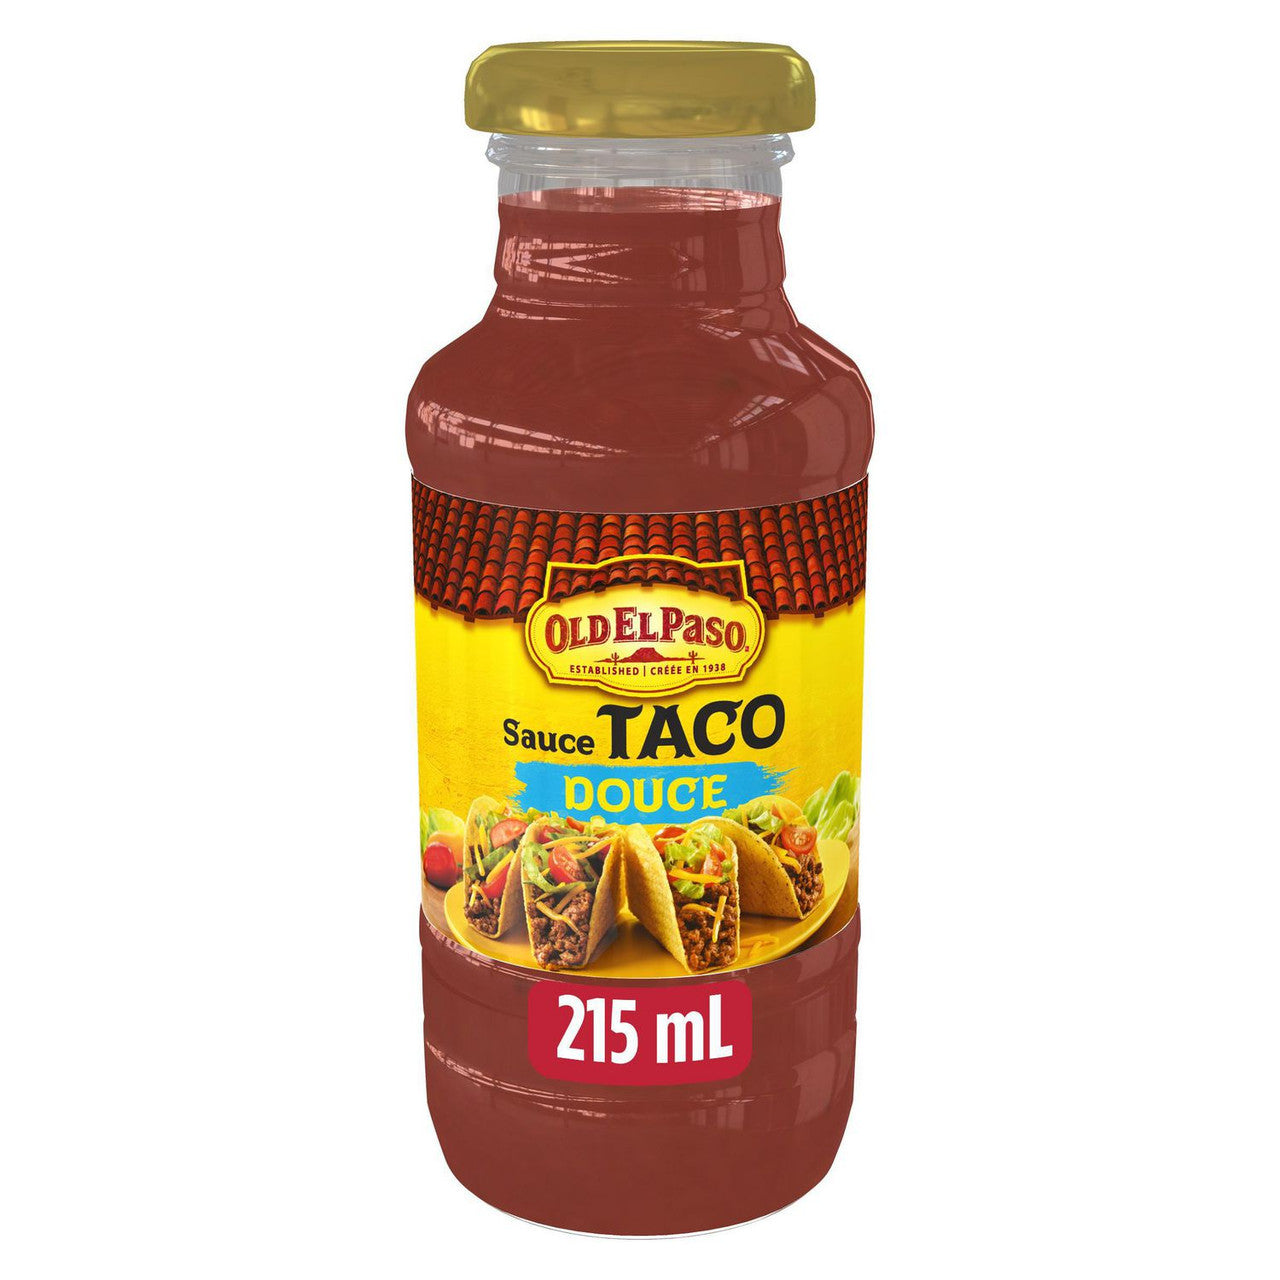 Old El Paso Taco Mild Sauce 215ml/7.3 fl. oz., {Imported from Canada}